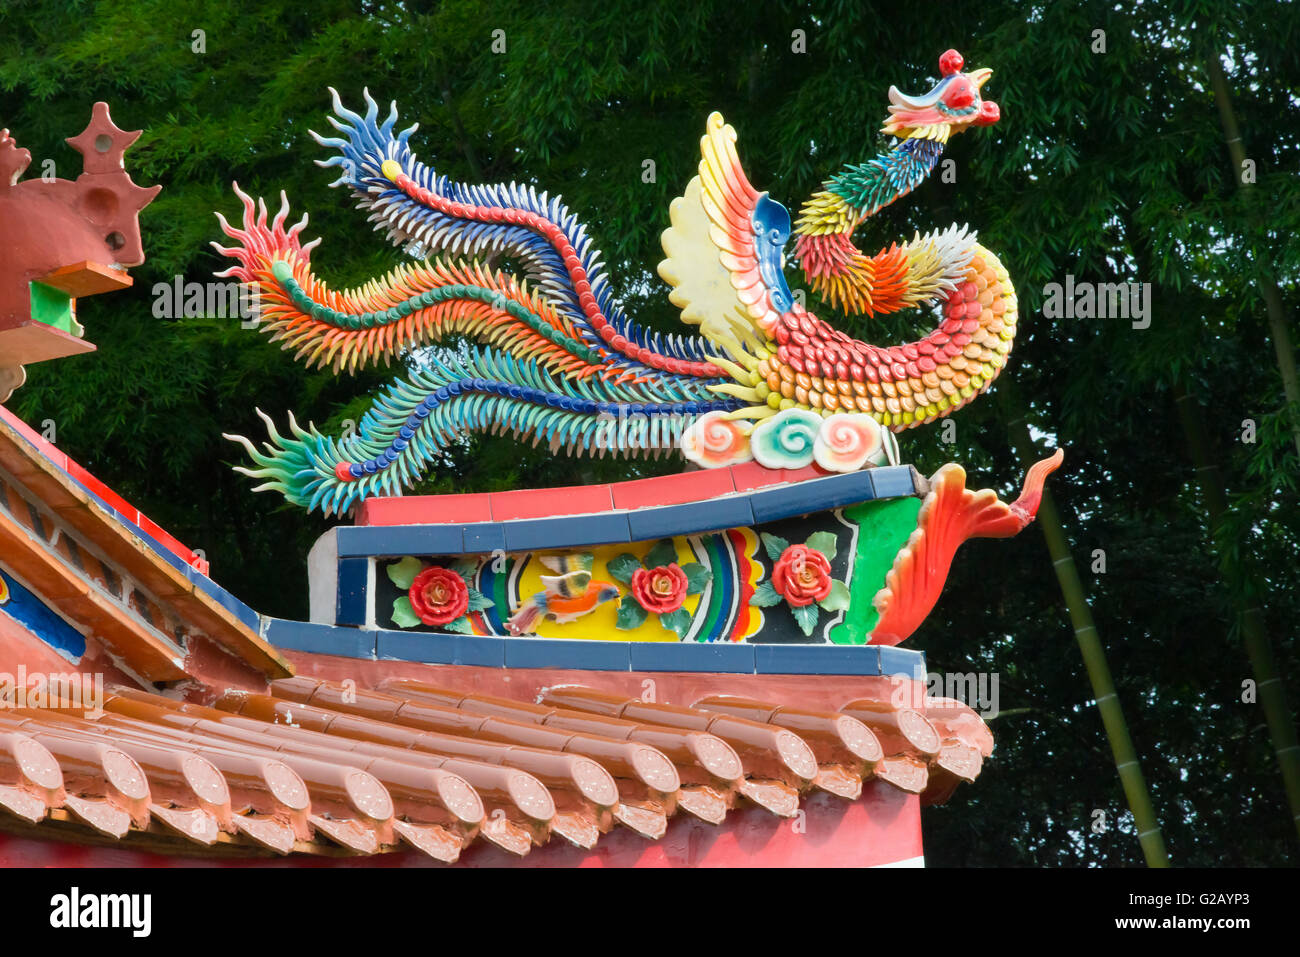 Temple with ornate sculpture decoration, Nanjing County, Fujian Province, China Stock Photo